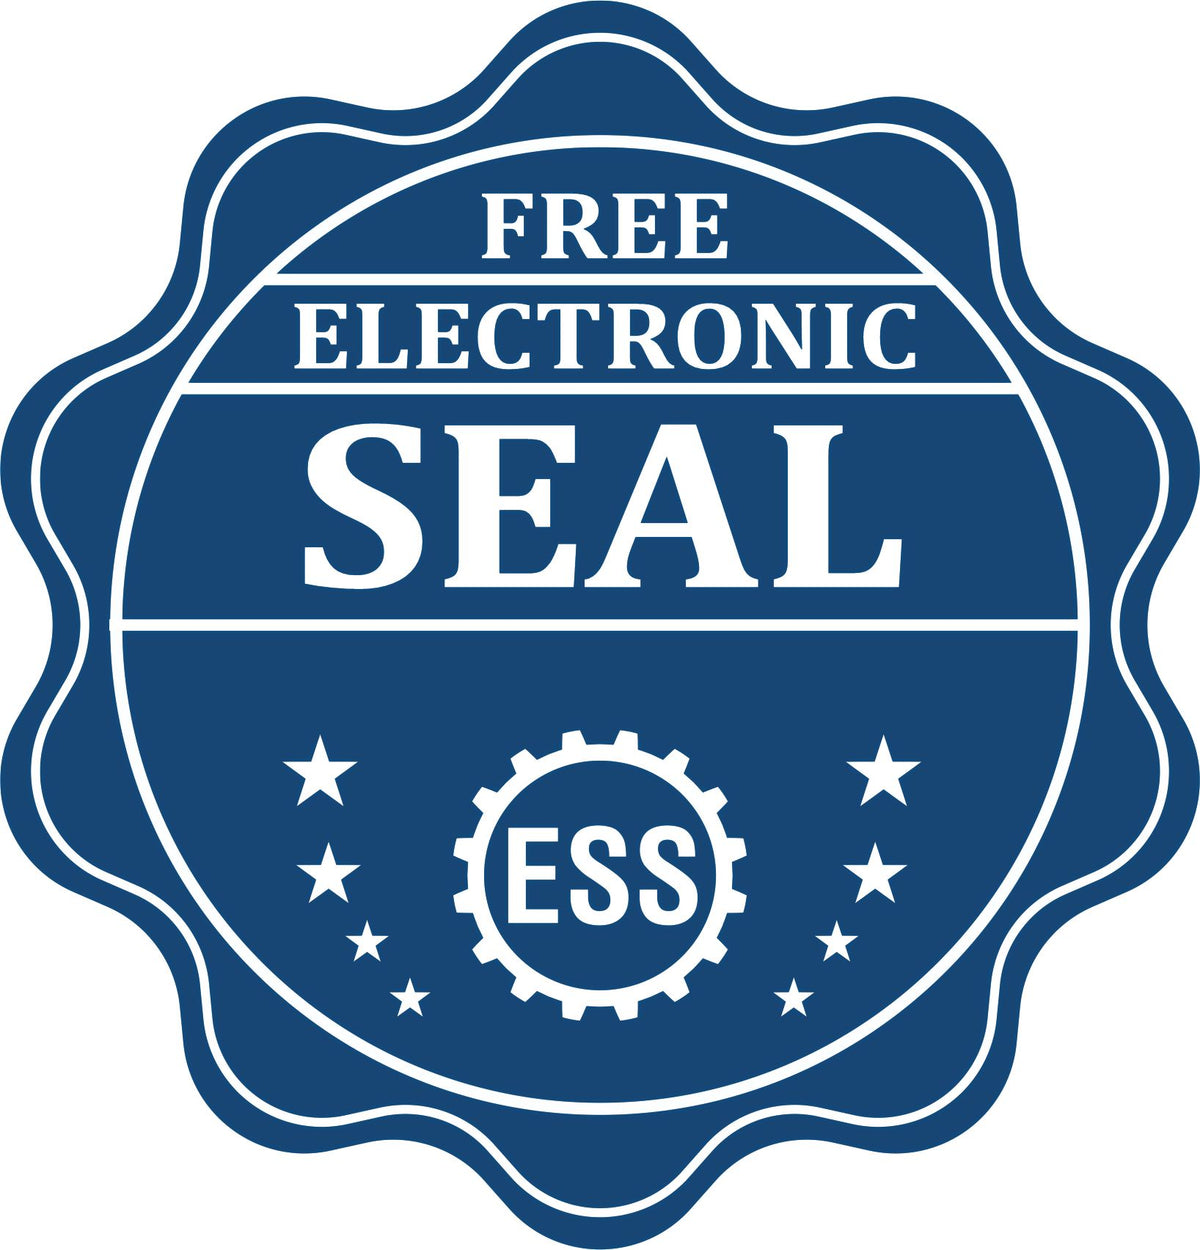 A badge showing a free electronic seal for the State of Oklahoma Extended Long Reach Engineer Seal with stars and the ESS gear on the emblem.